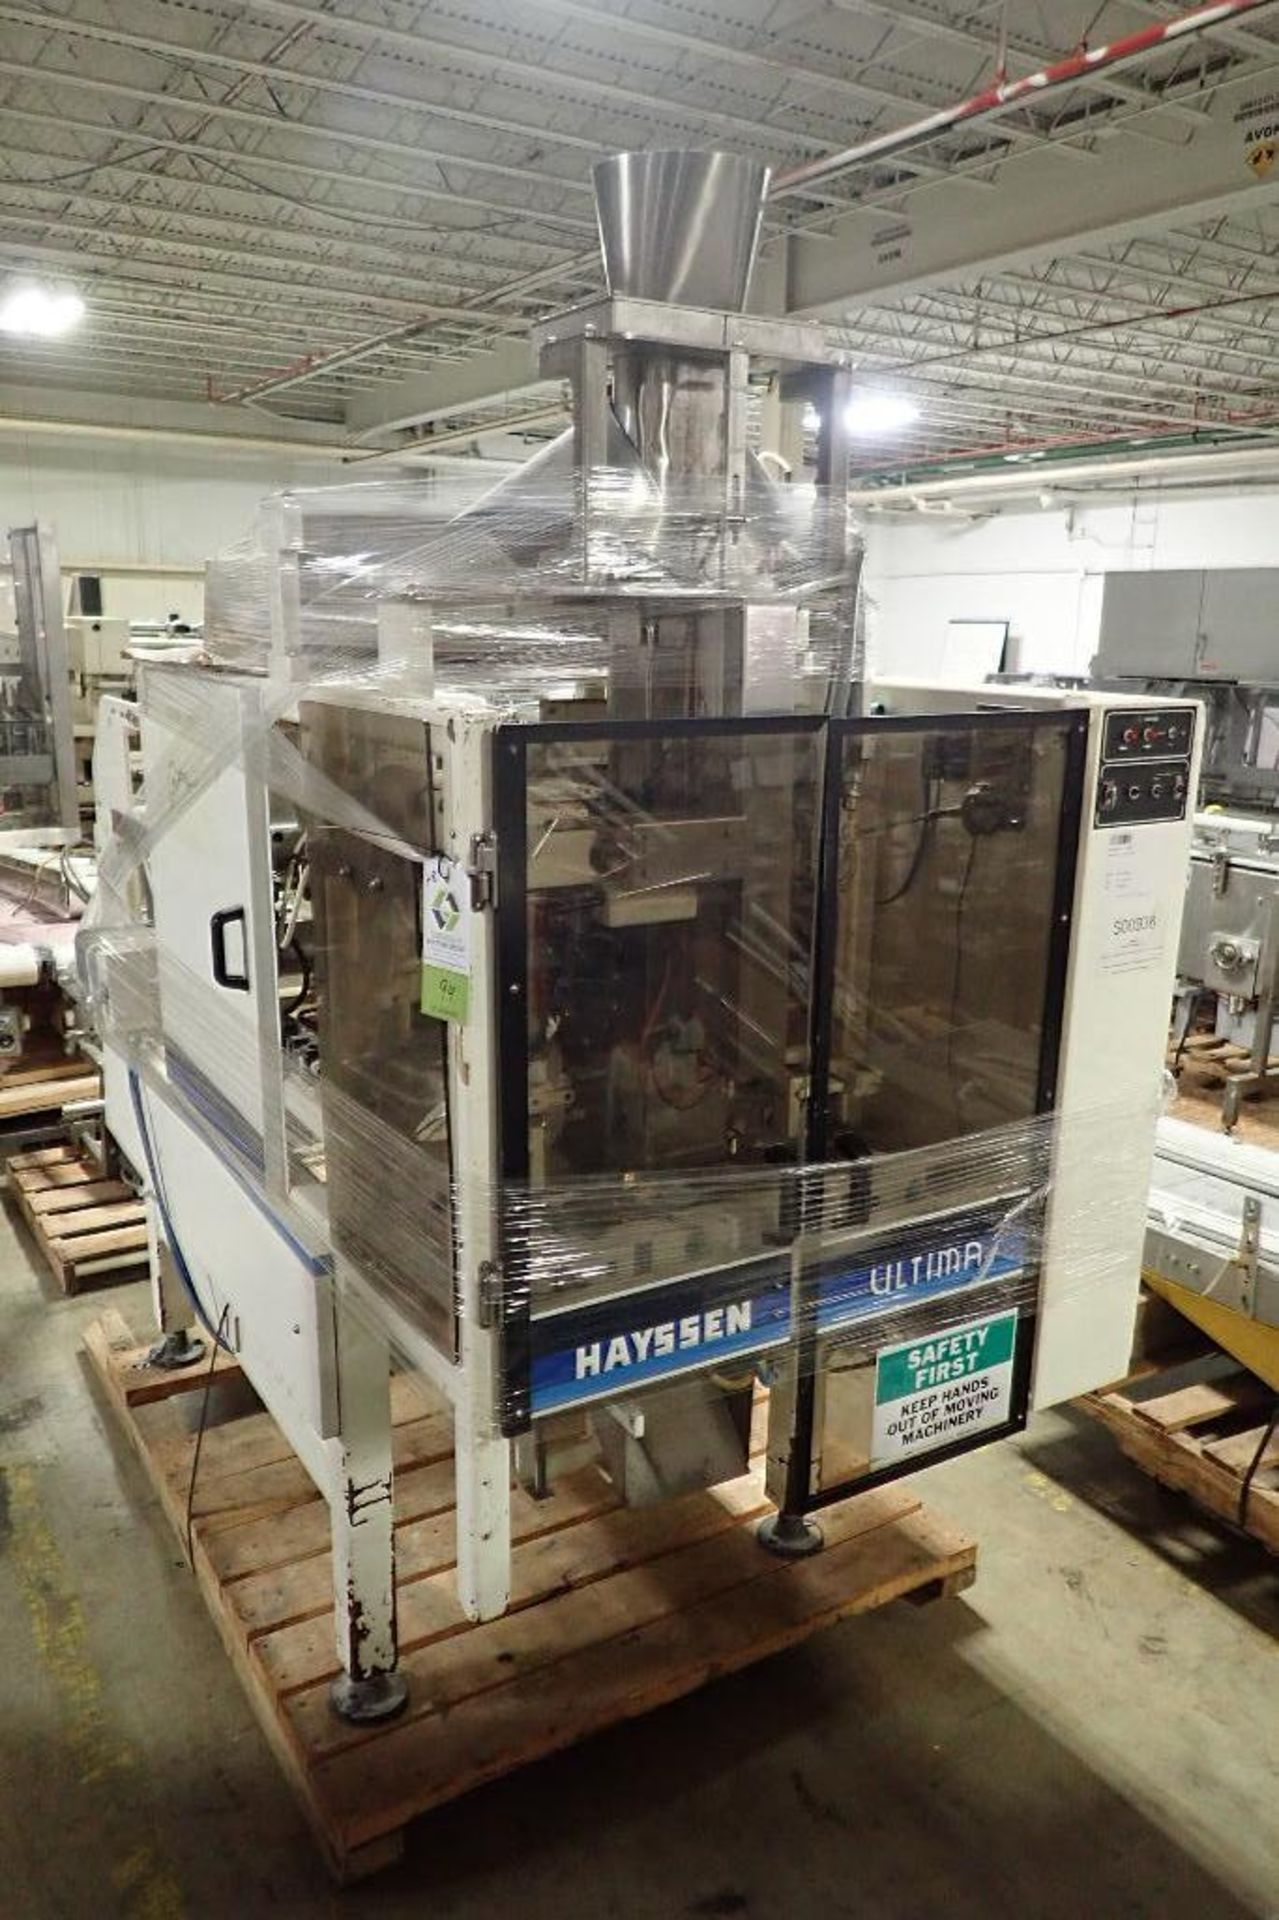 1994 Hayssen Yamato data weigh 8 head scale, Model ADW-508MD, SN 084026/930442, 8 g to 1000 g capaci - Image 14 of 34